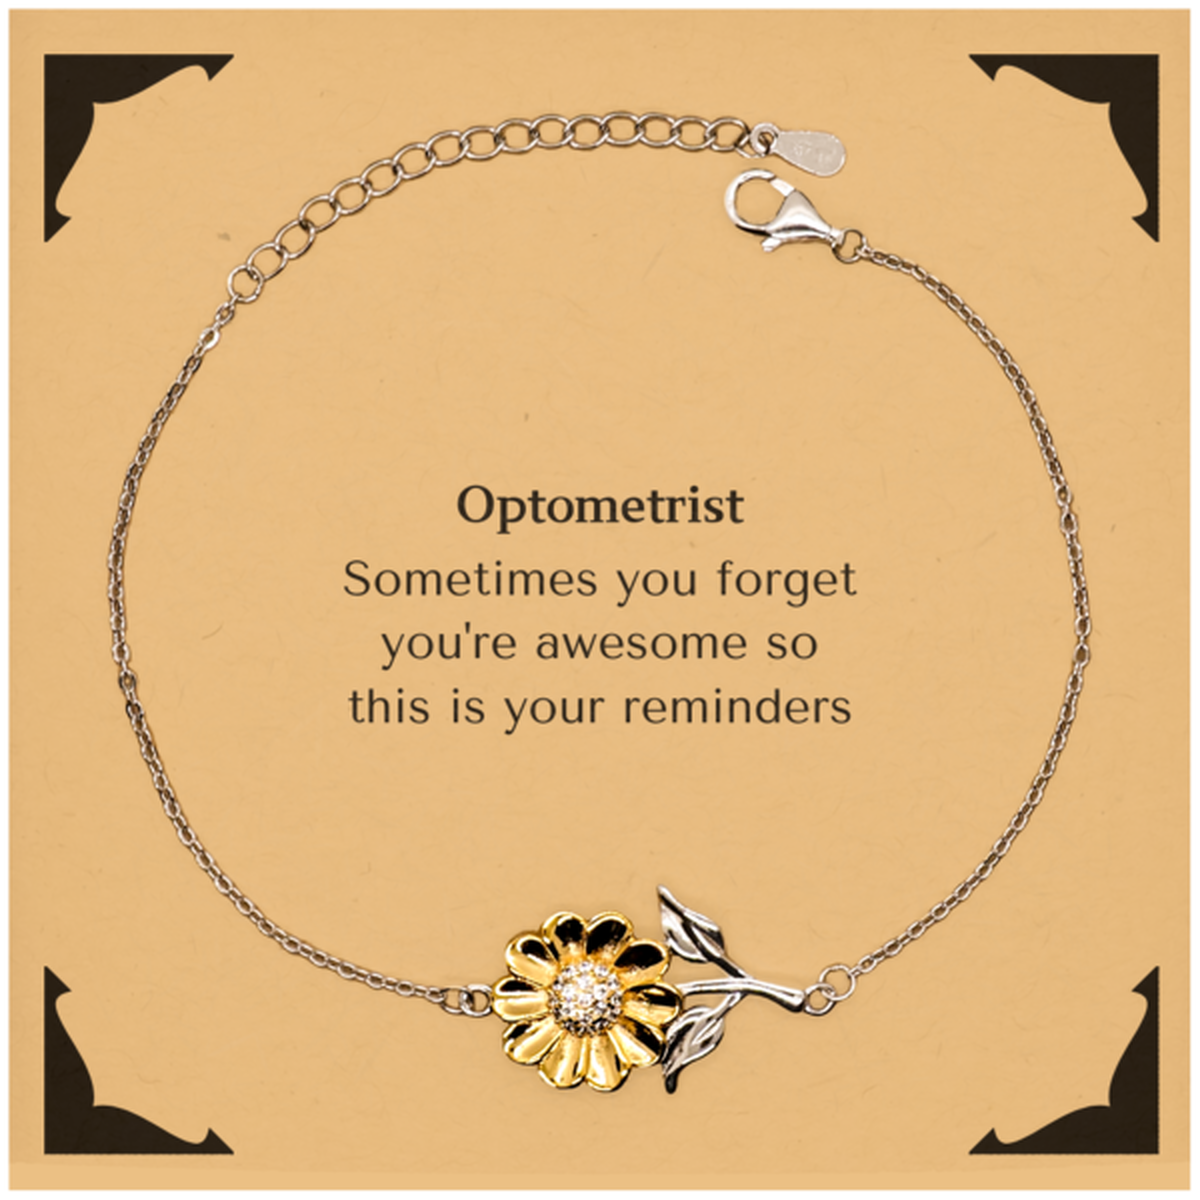 Sentimental Optometrist Sunflower Bracelet, Optometrist Sometimes you forget you're awesome so this is your reminders, Graduation Christmas Birthday Gifts for Optometrist, Men, Women, Coworkers